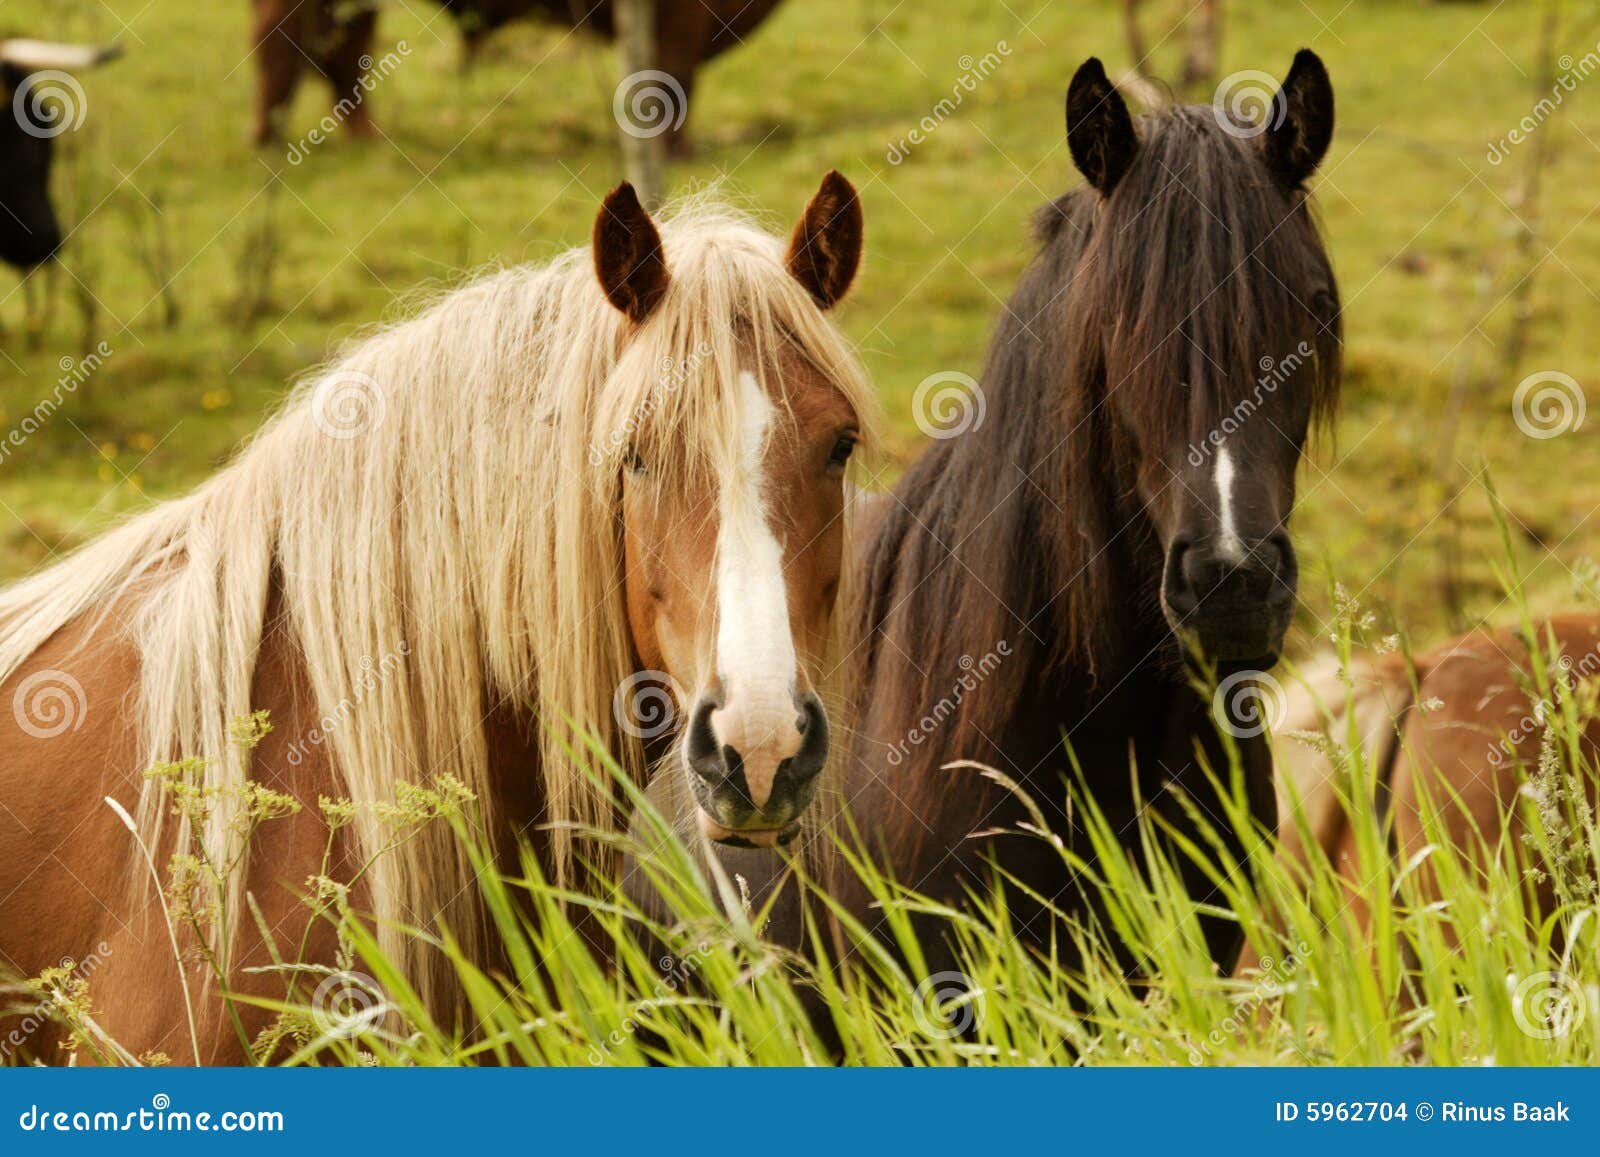 two curious horses